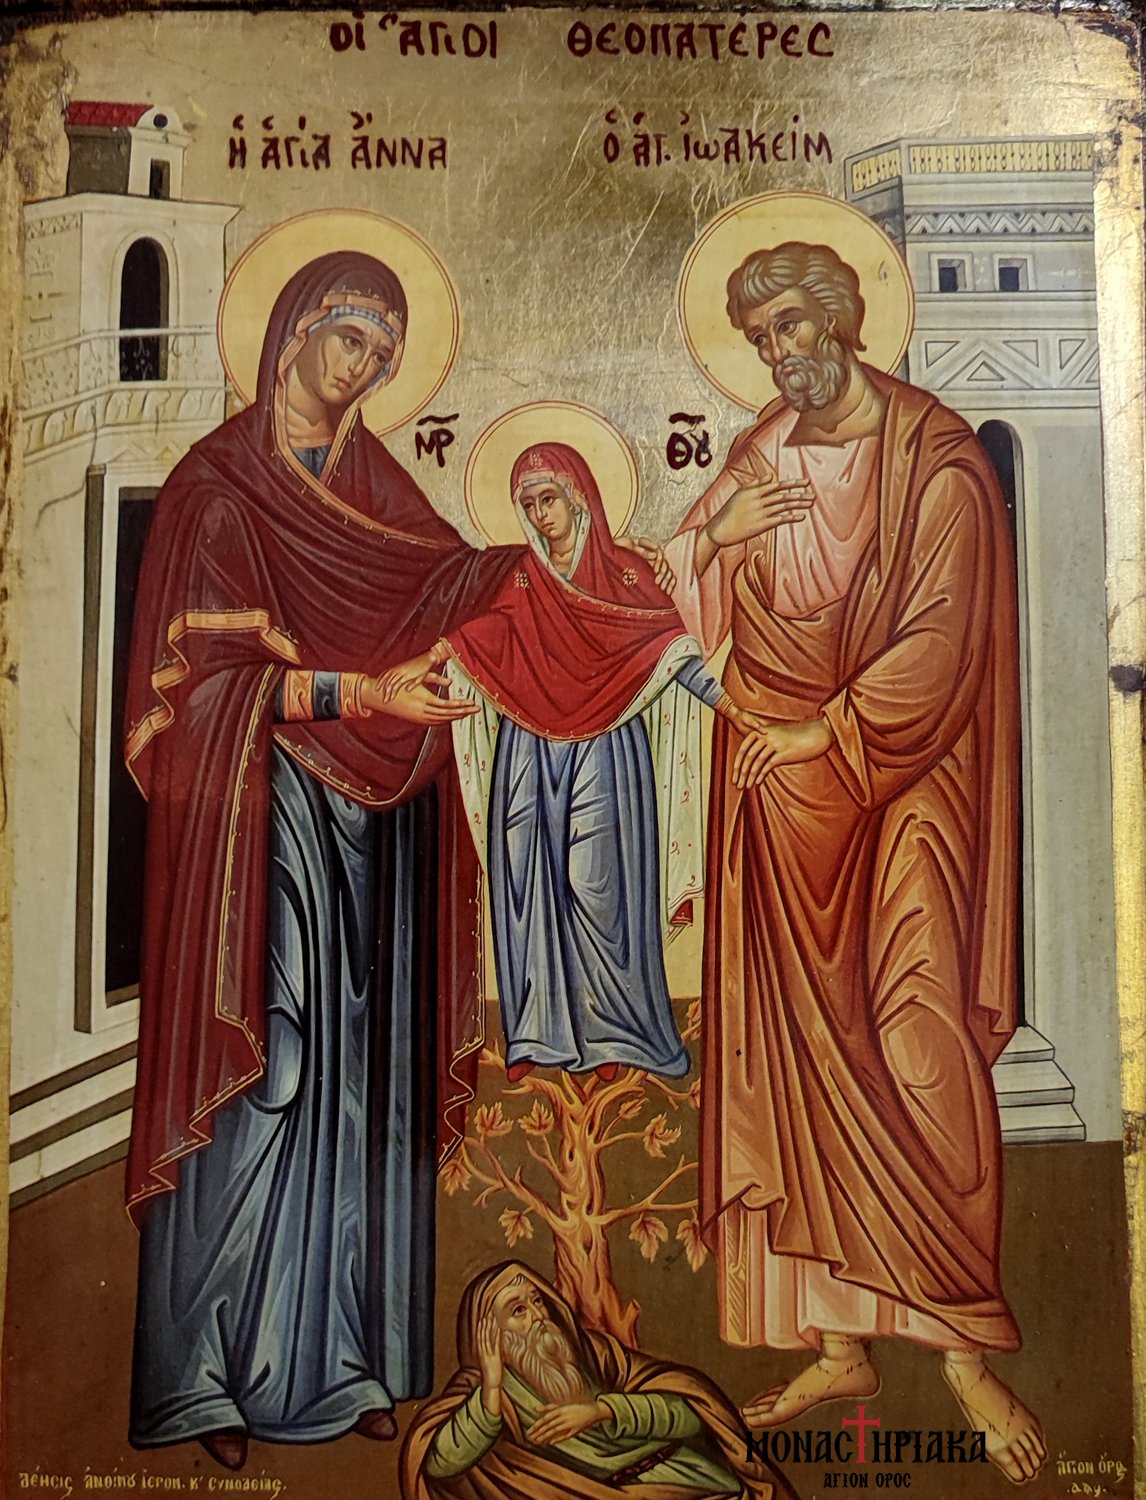 Saint Anna with her parents